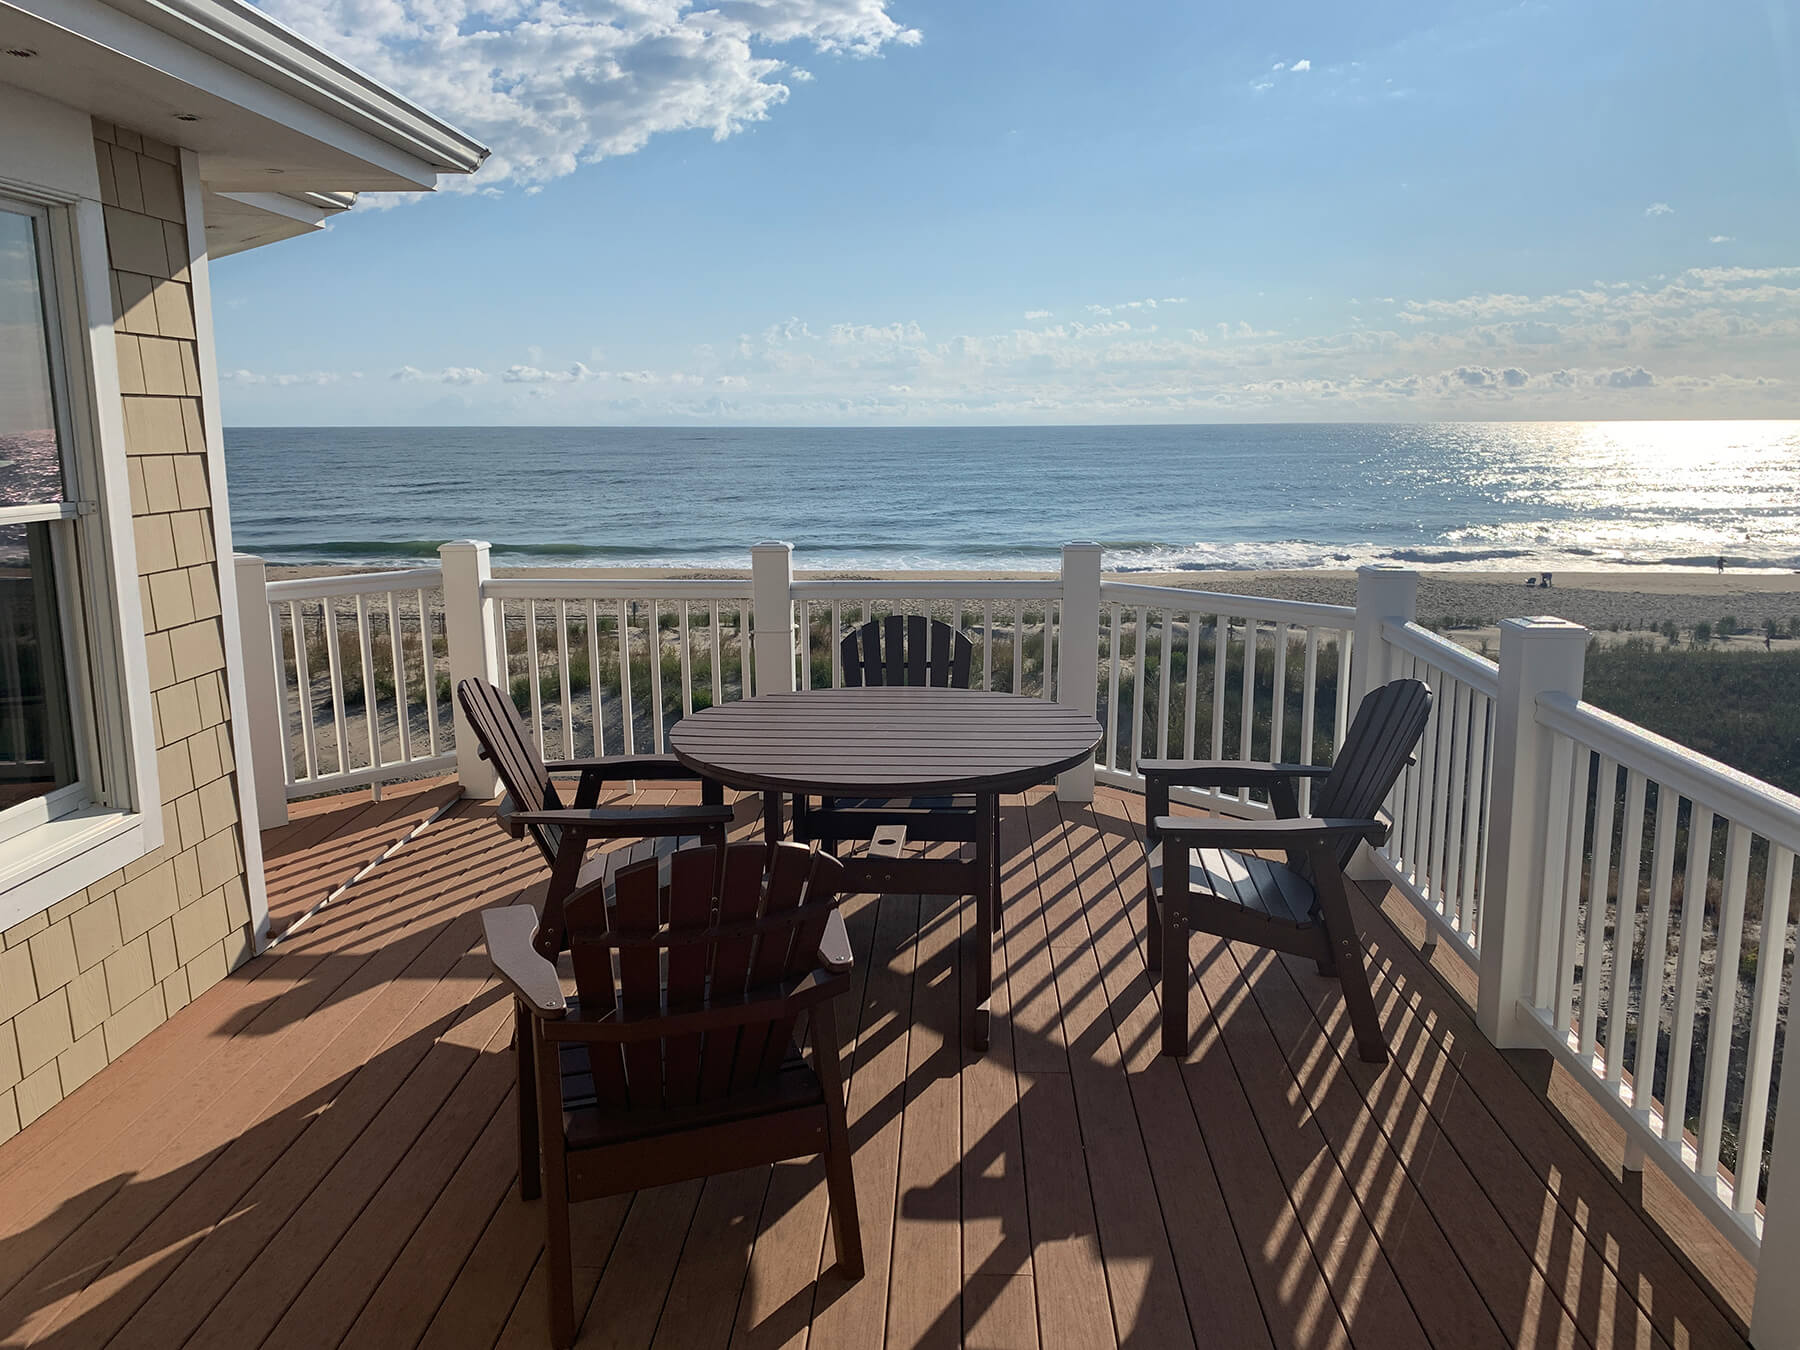 Deck Renovation in Campbell Place, Bethany Beach DE - Table with Six Wooden Chairs and Stainless Steel Grill